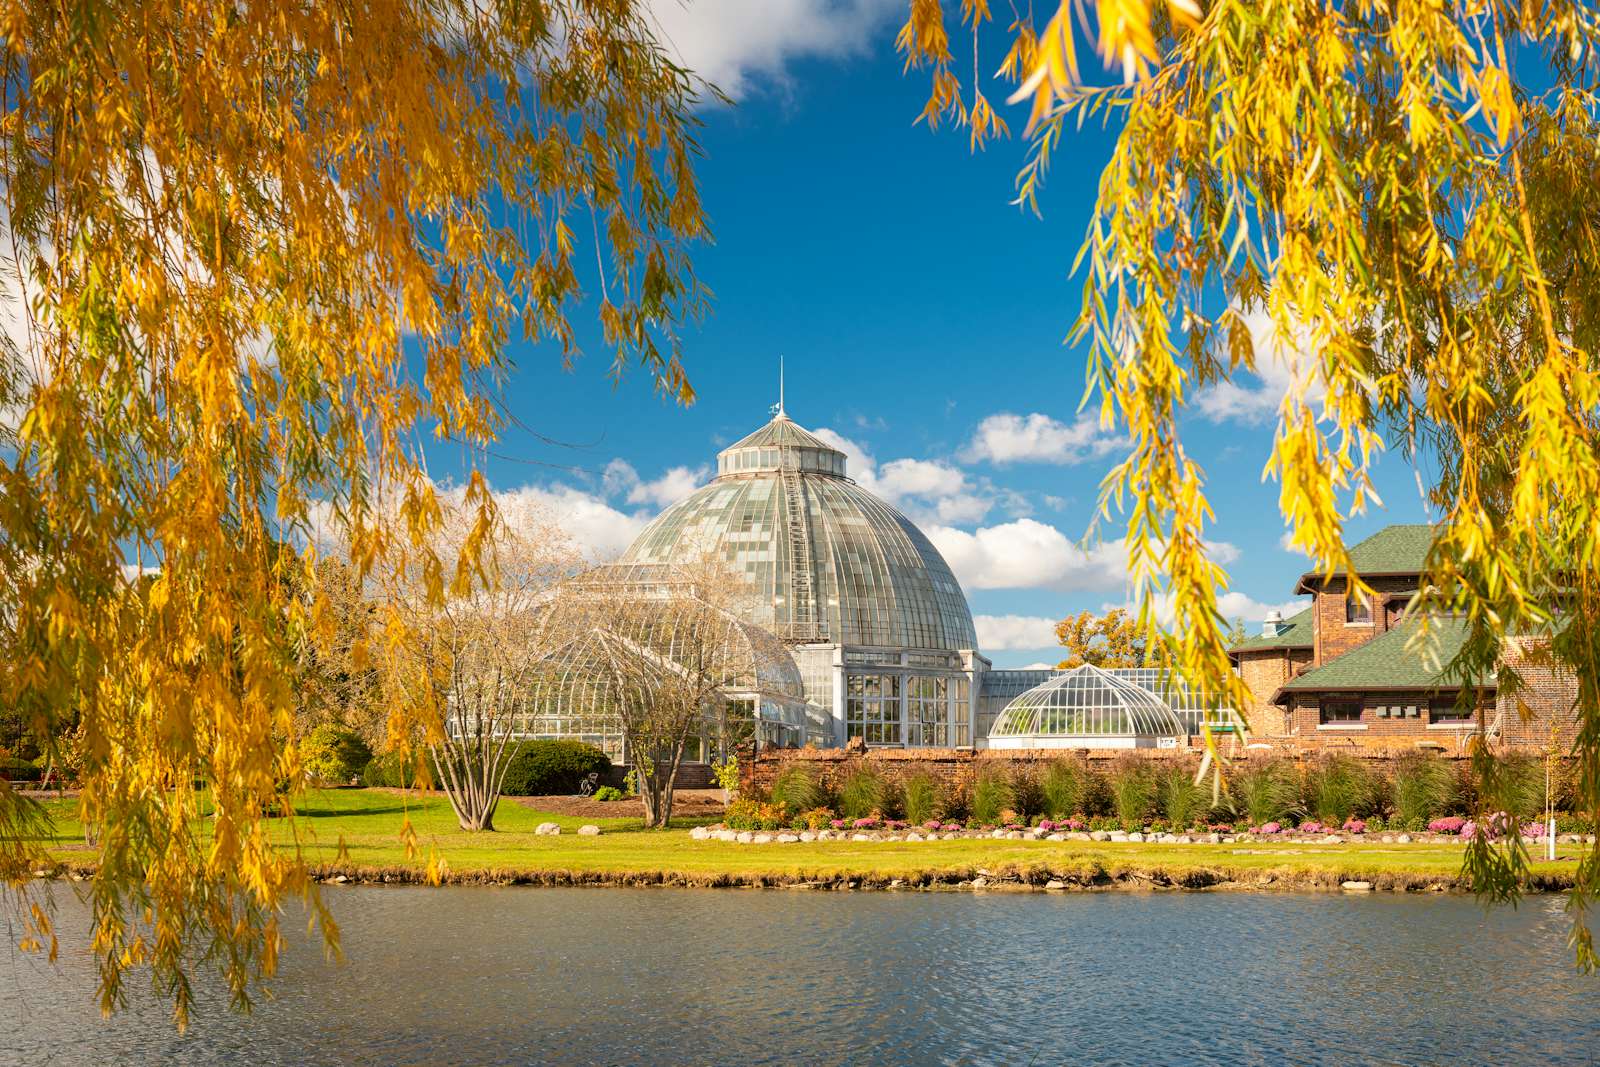 Belle Isle conservatory in Dertroit with autumn foliage.